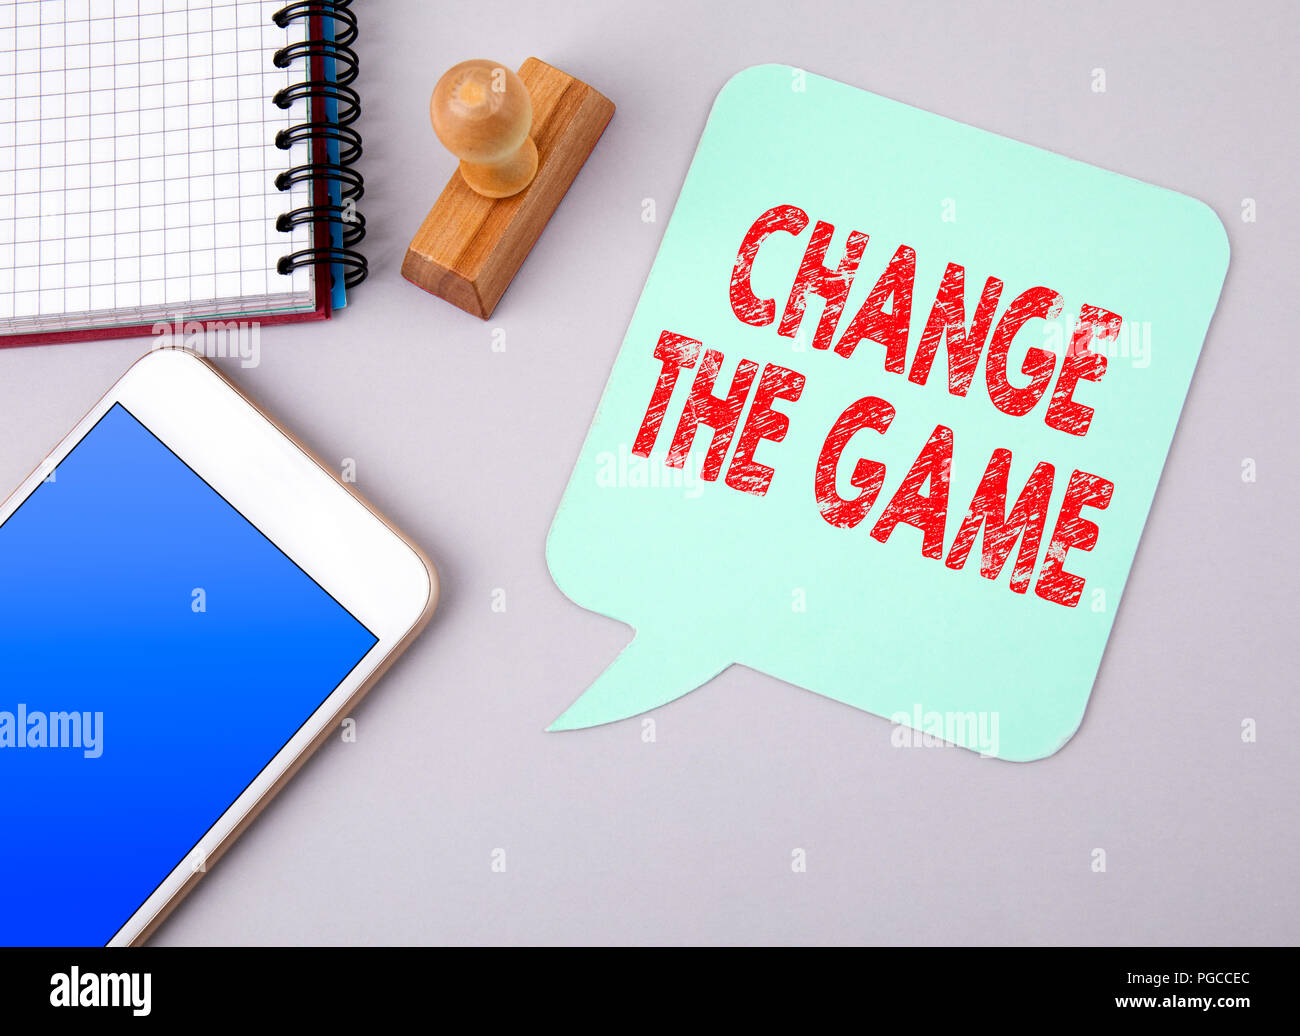 Change The Game. Business and social media Stock Photo